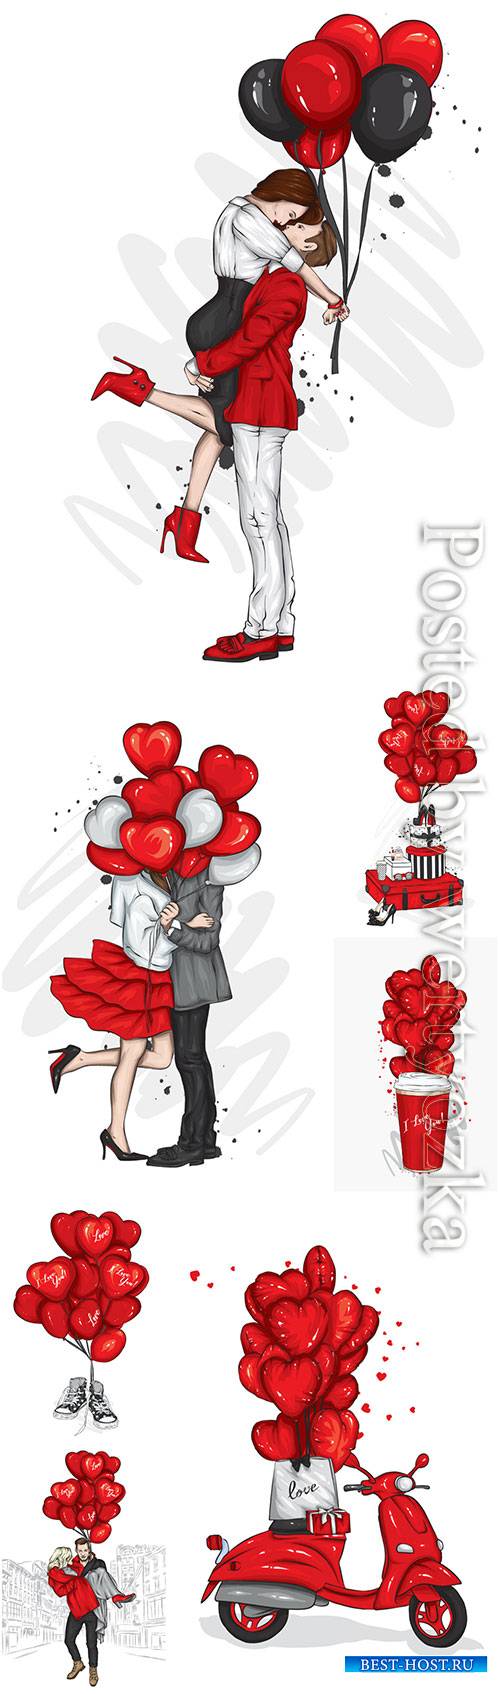 Loving couple with heart-shaped balloons